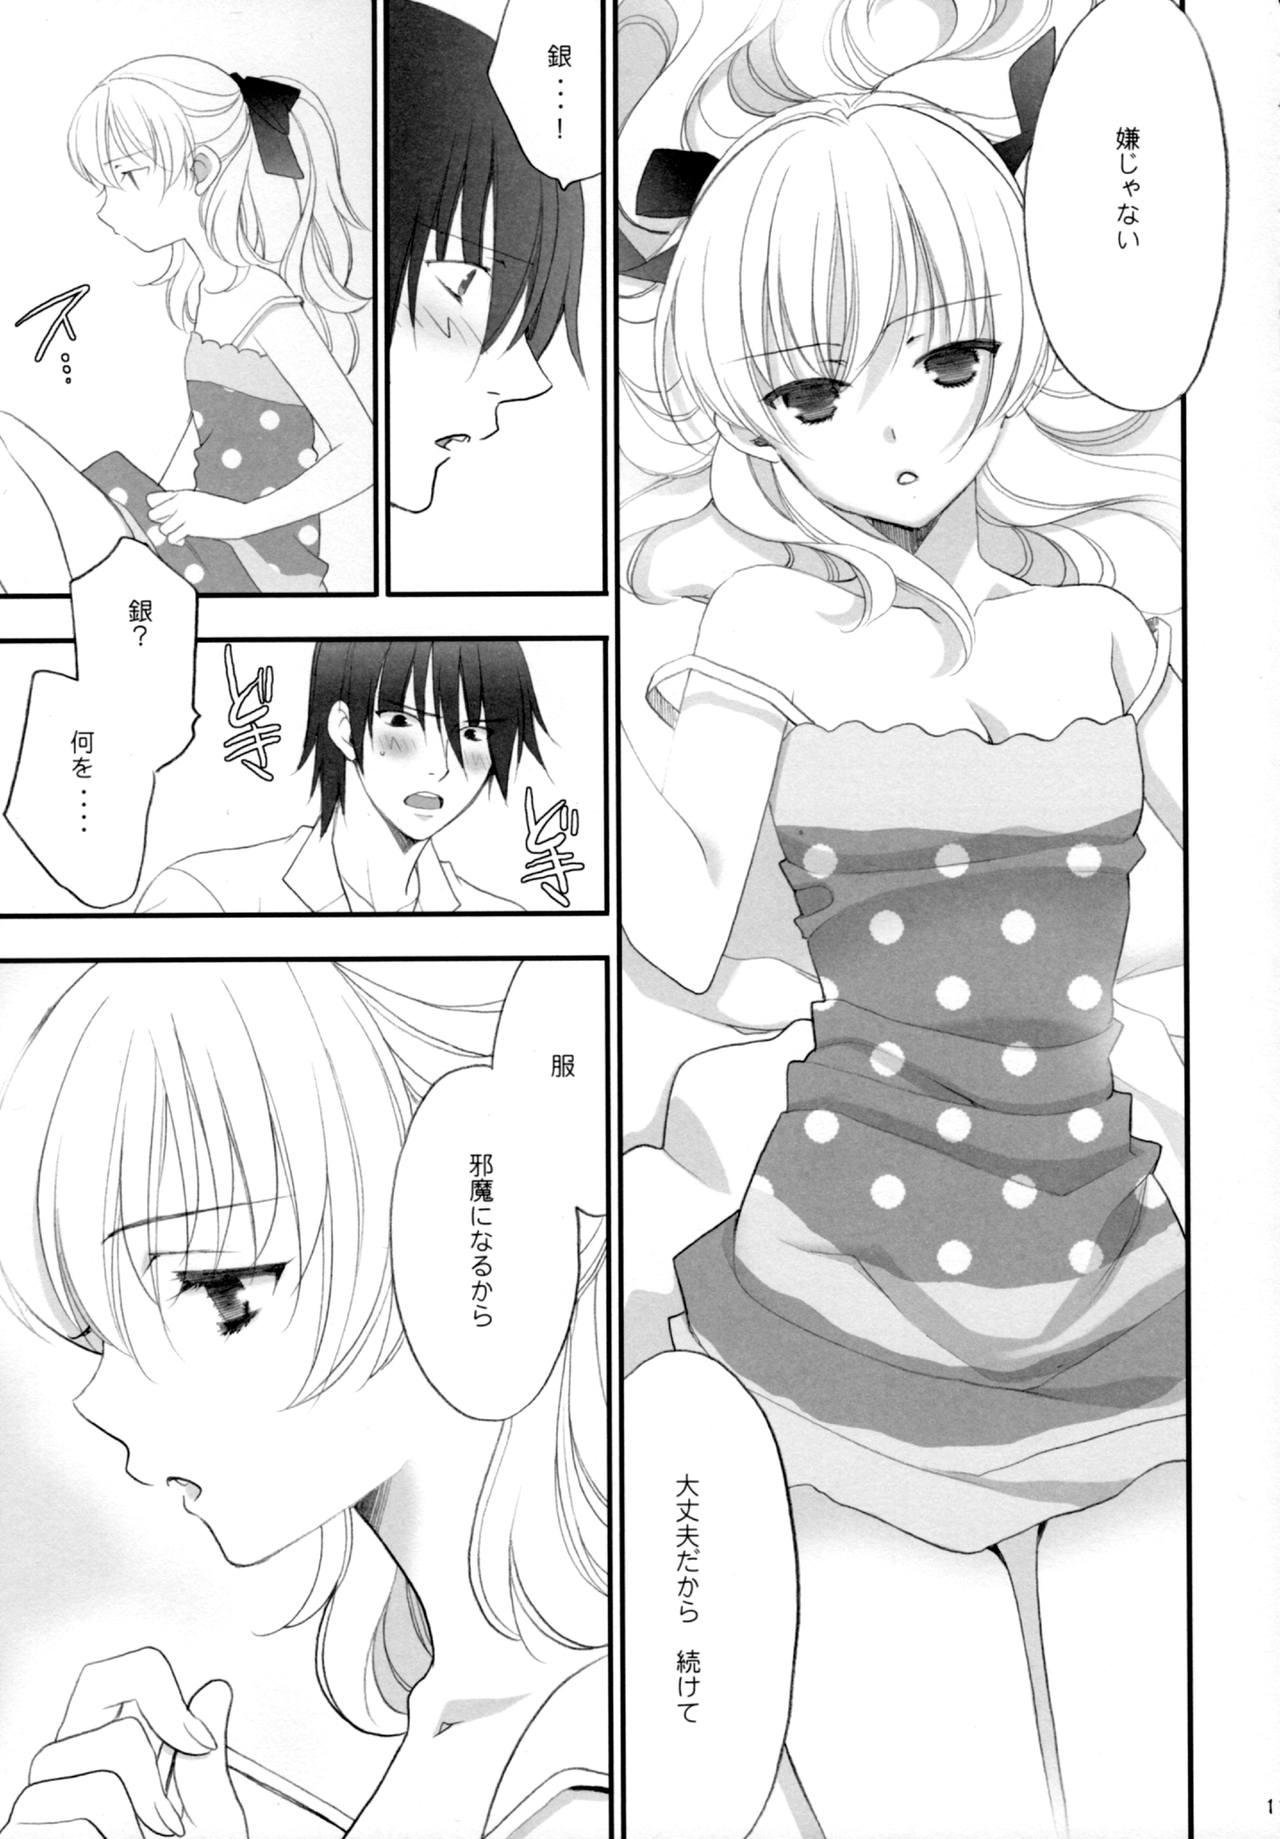 Real Sex Ryuusei LOVERS/04 - Darker than black Teen Blowjob - Page 10